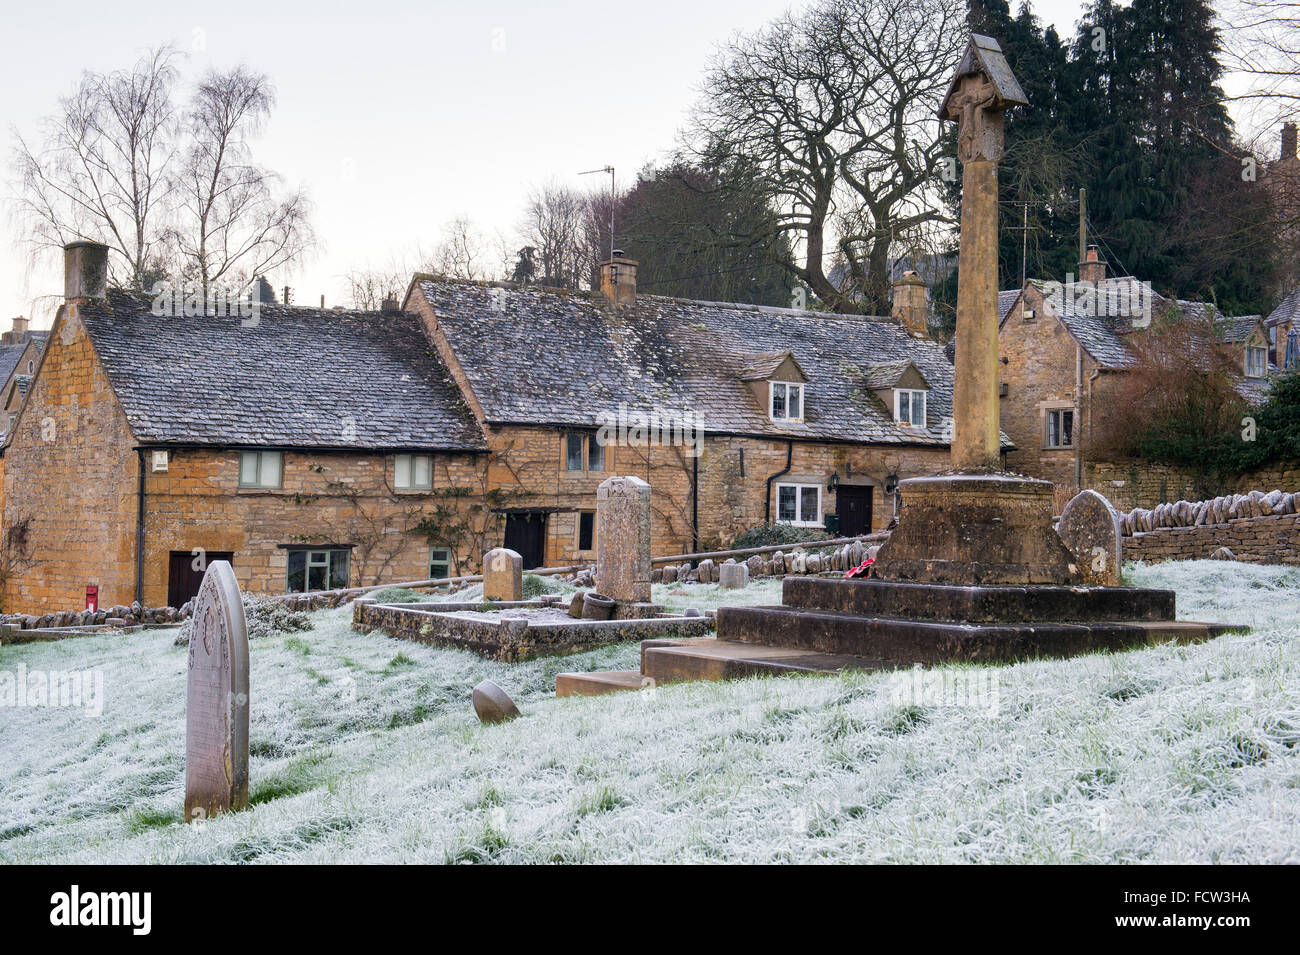 Early morning winter frost in the village of Snowshill Cotswolds, Gloucestershire, England Stock Photo